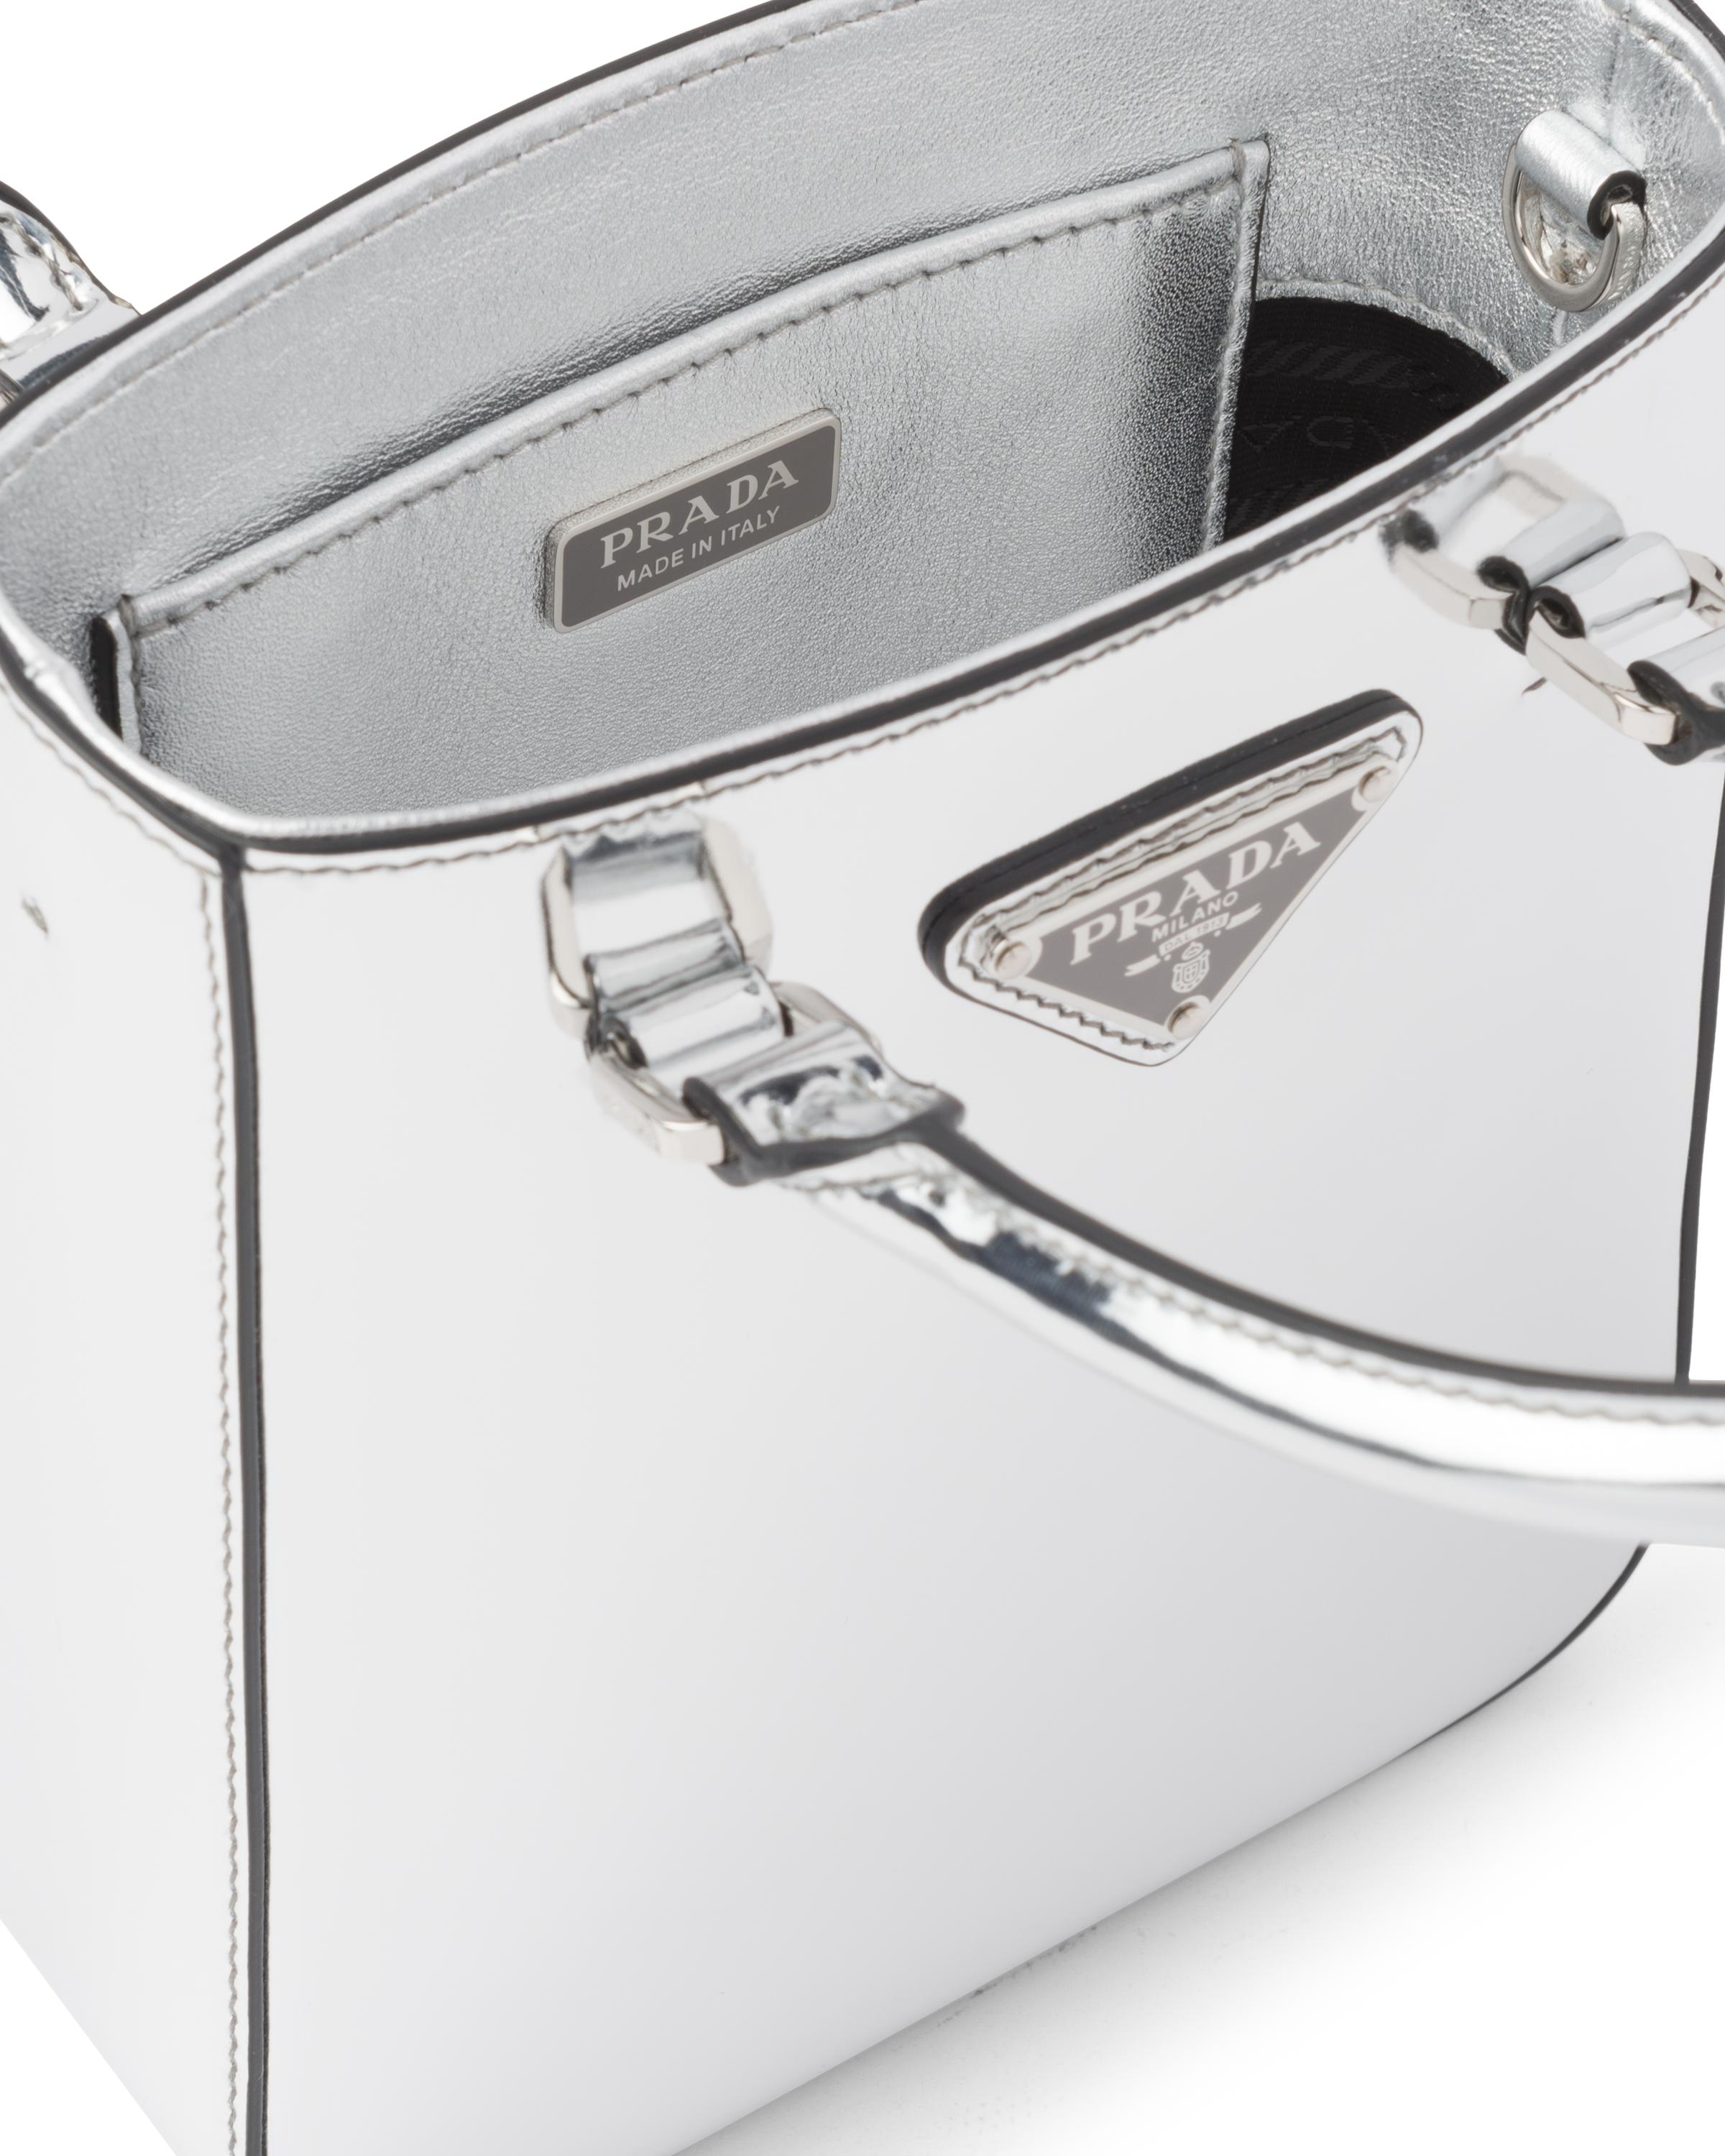 Prada Small Brushed Leather Tote in Silver (Metallic) - Lyst